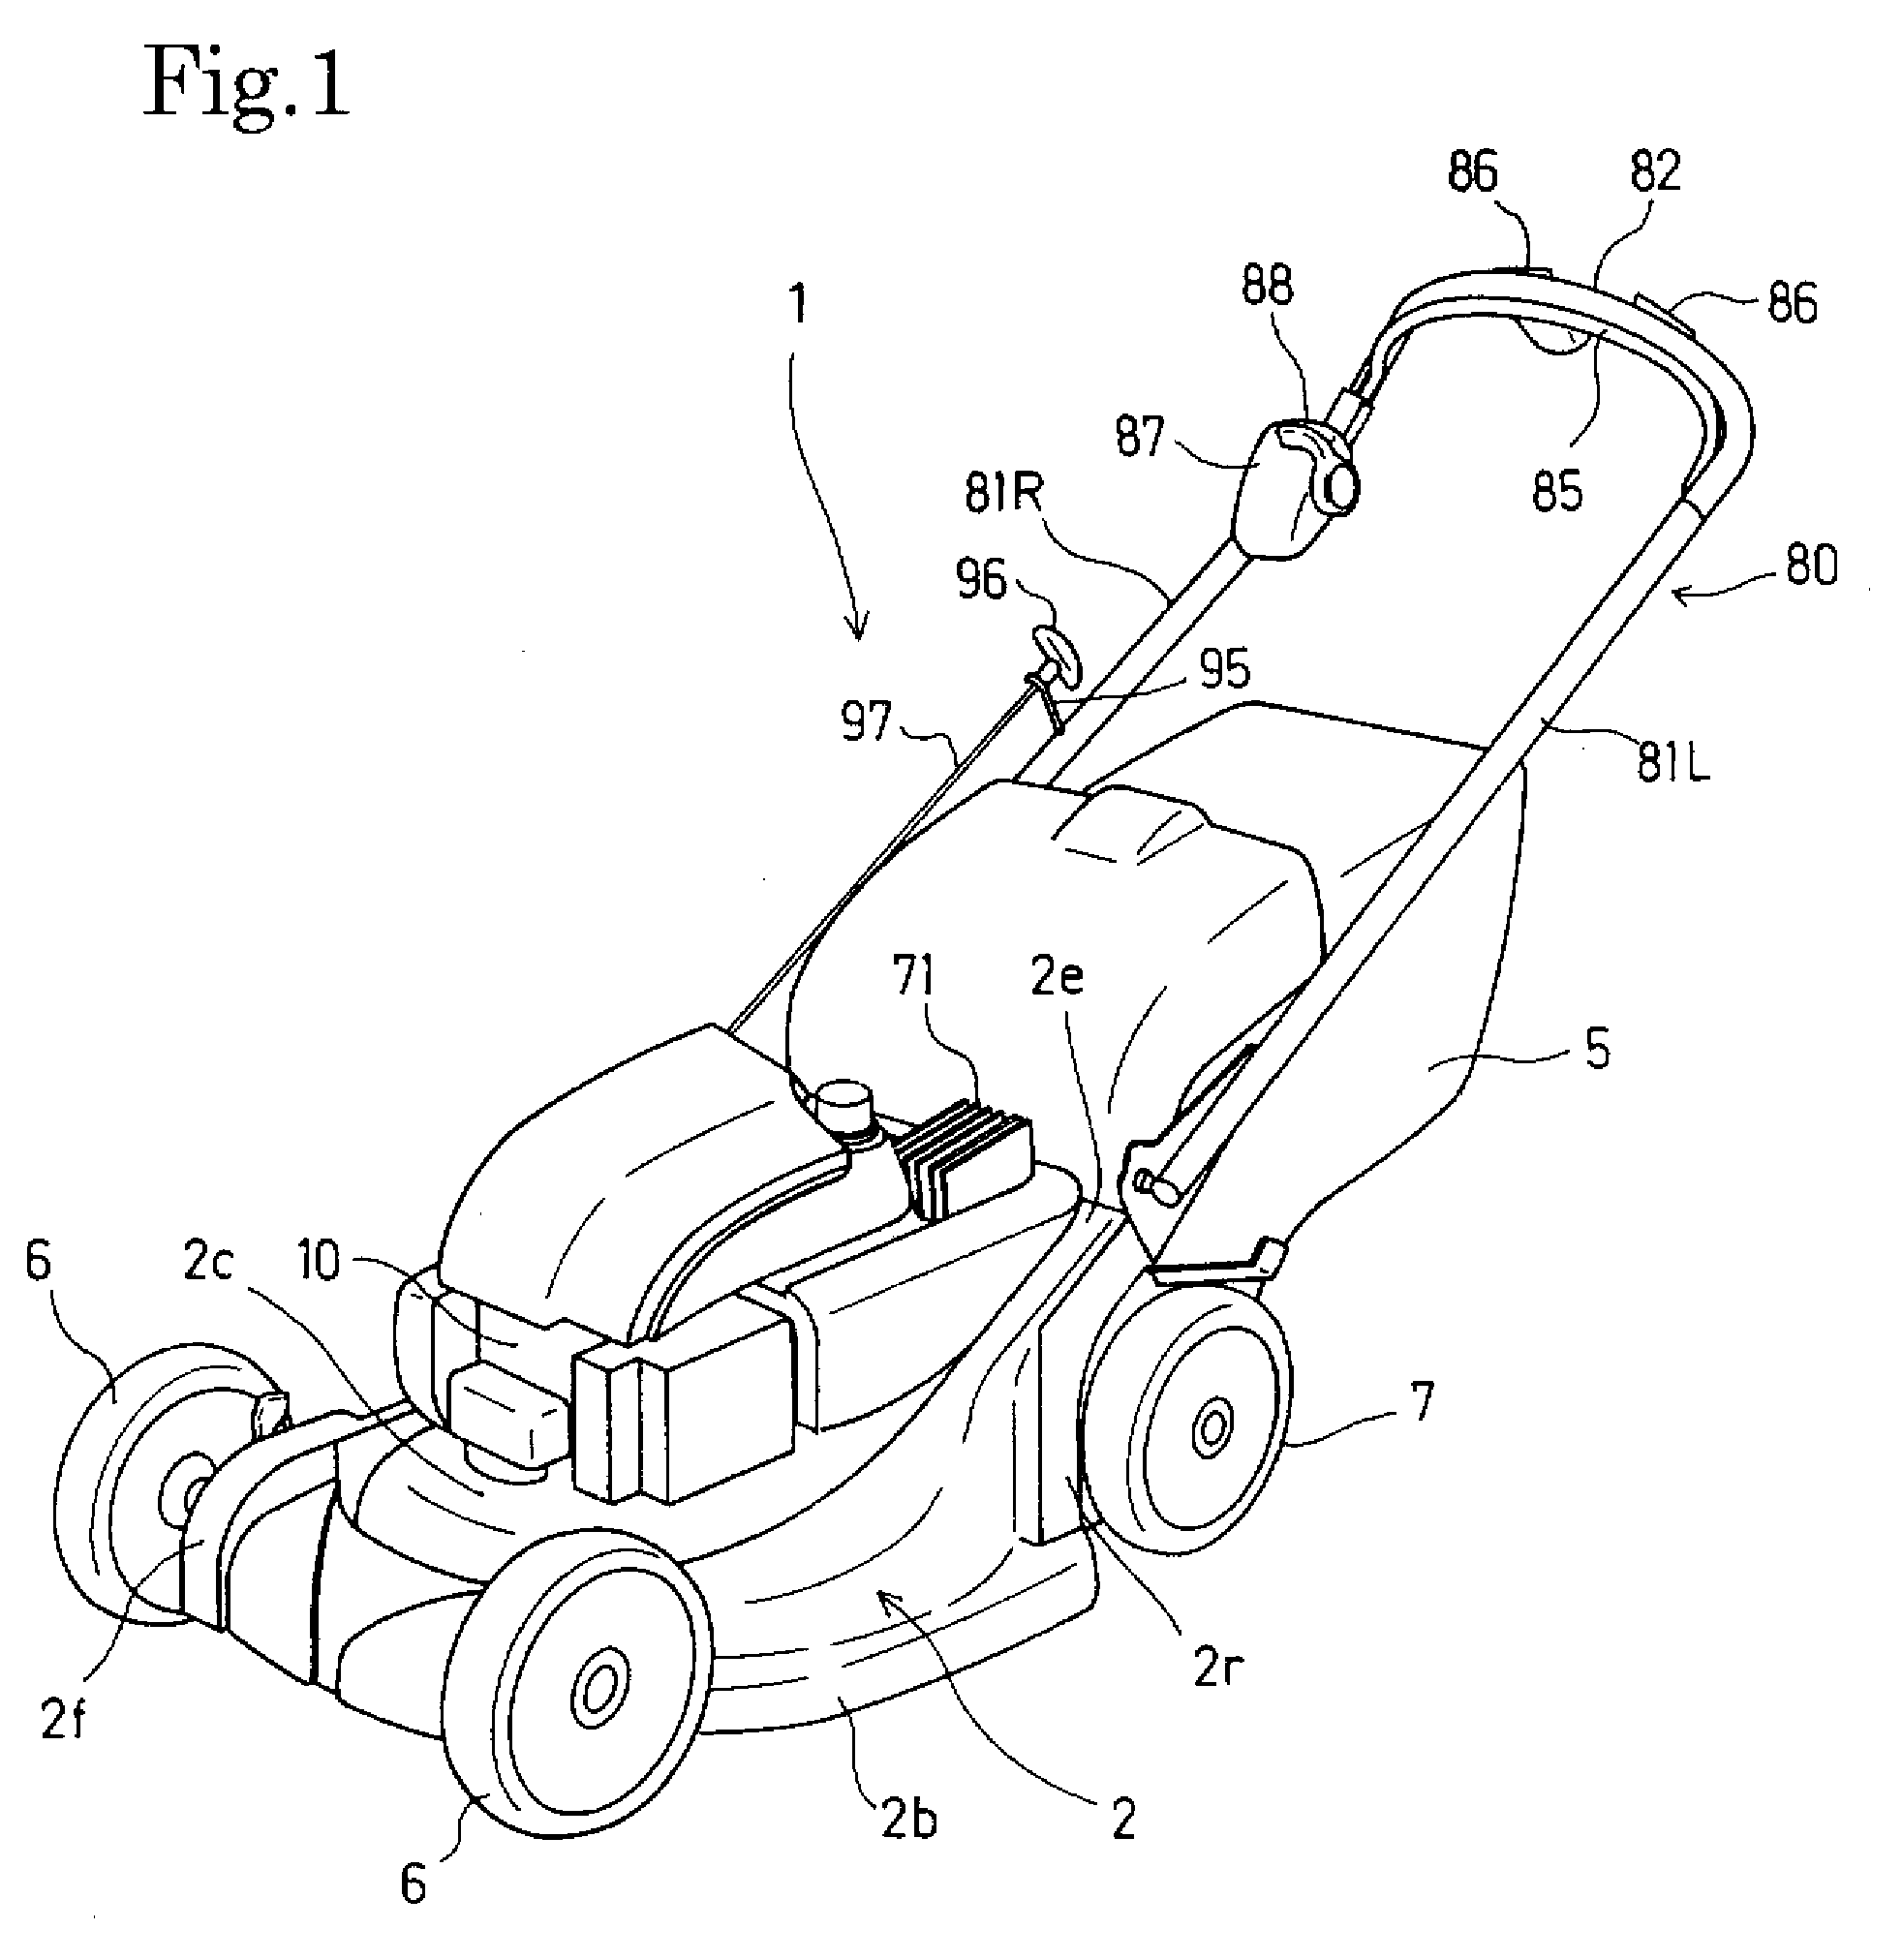 Load control mechanism for self-propelled working machine